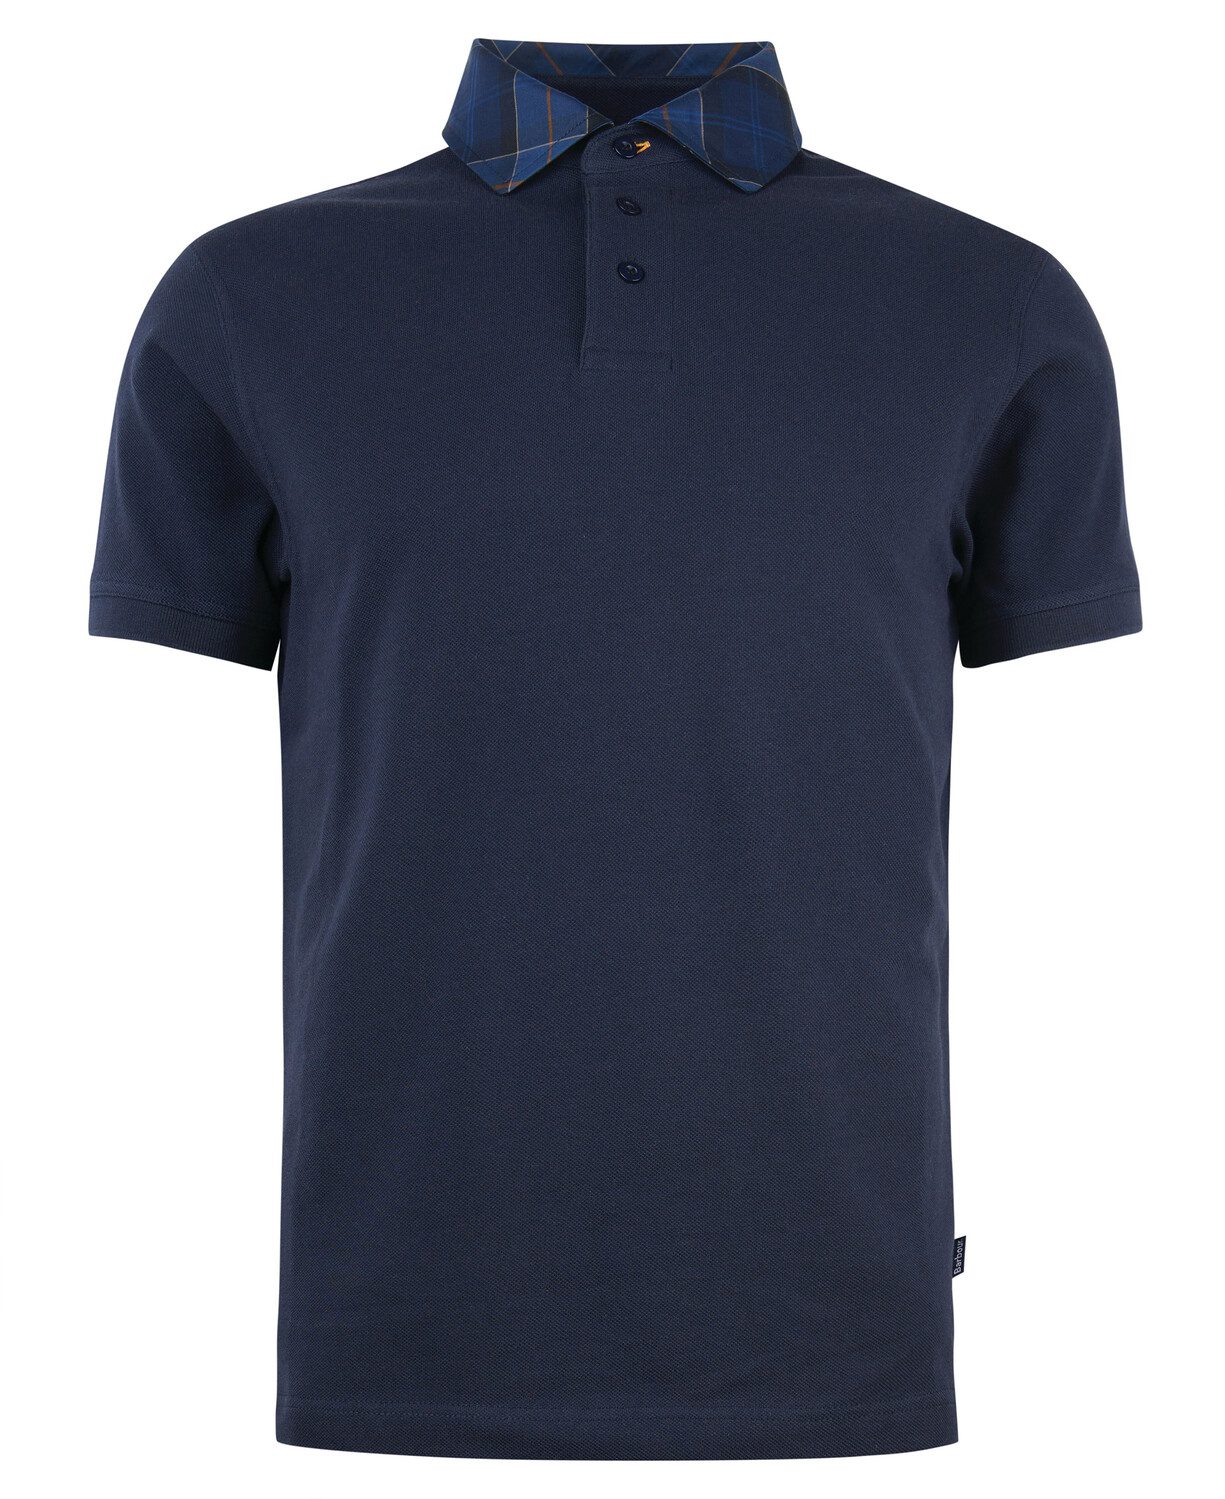 Barbour Navy and Midnight Lindale Polo Shirt 